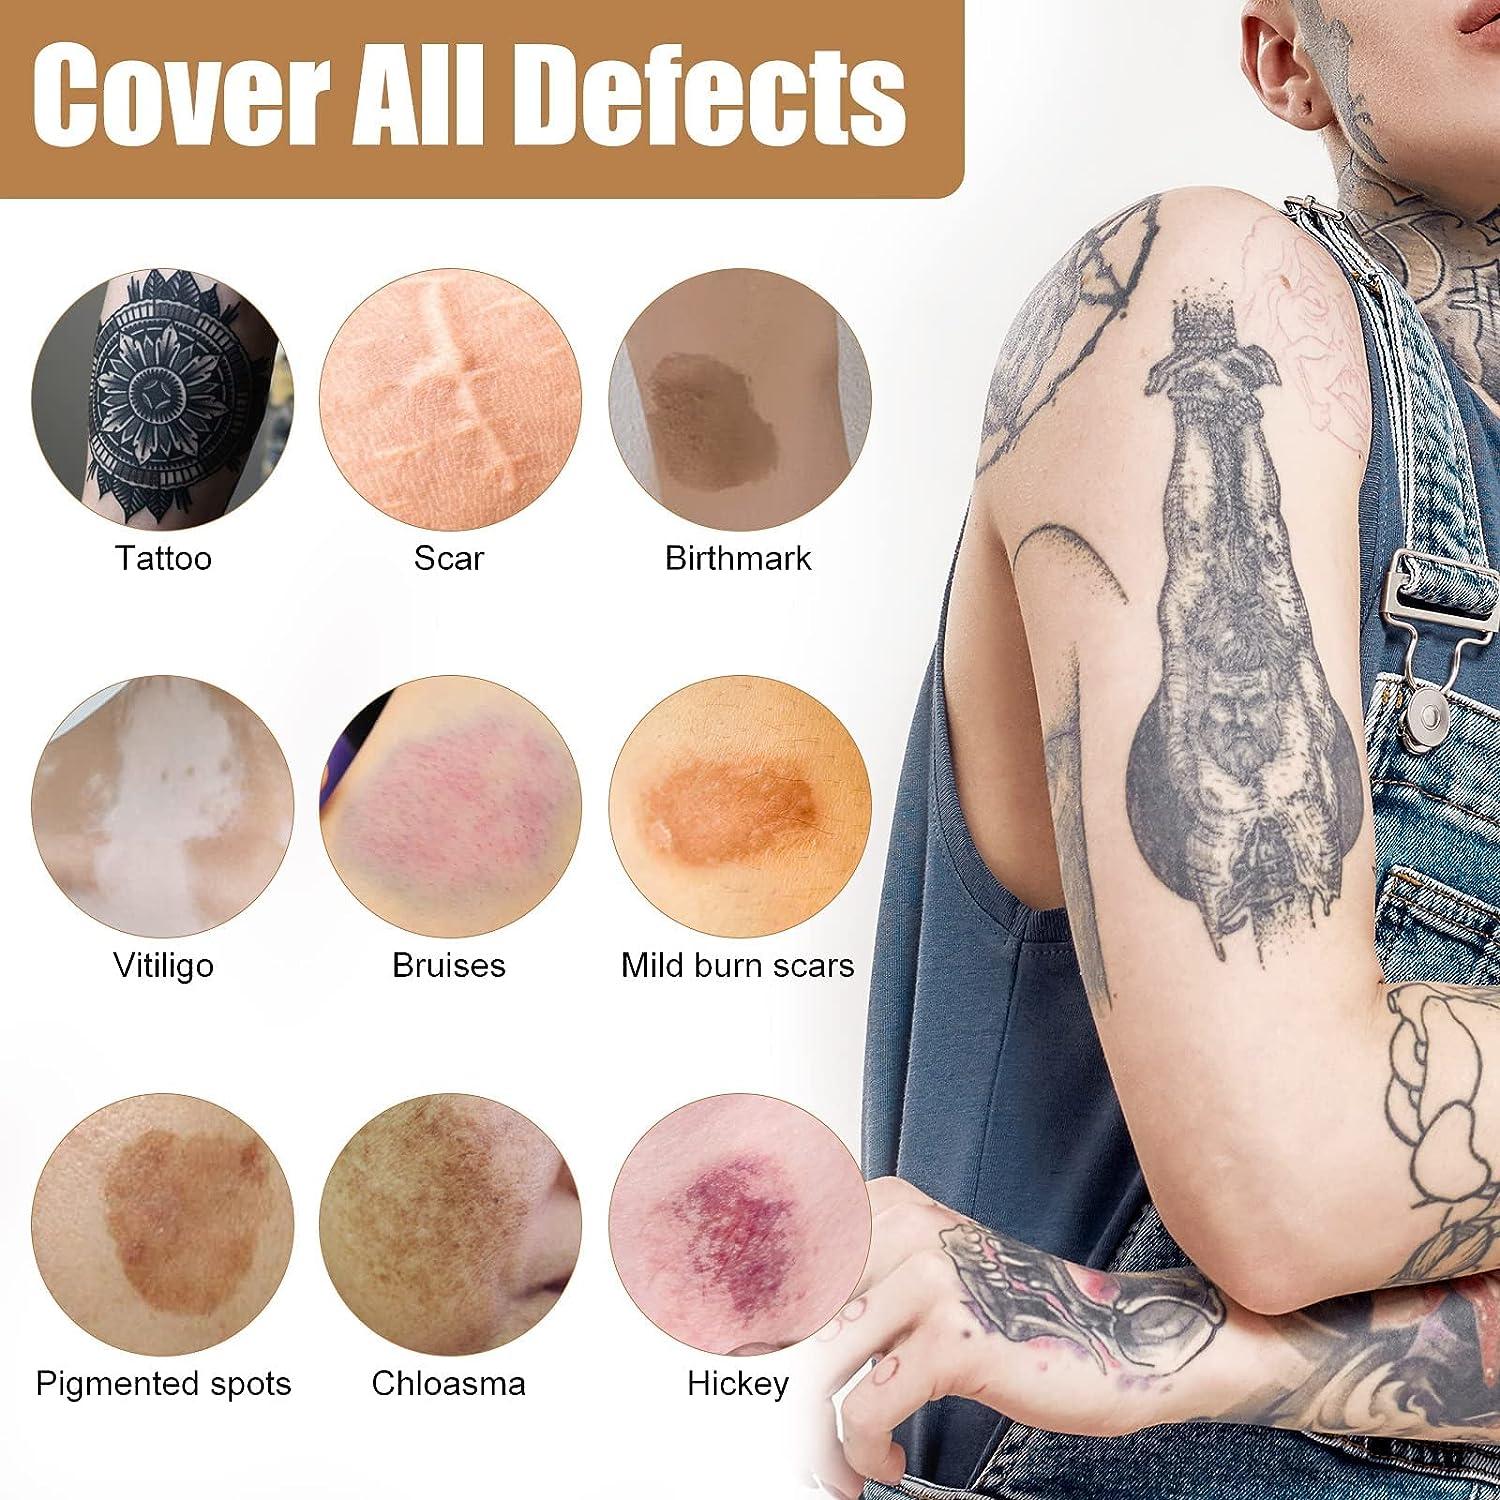 What To Expect When You Go For A Tattoo Coverup